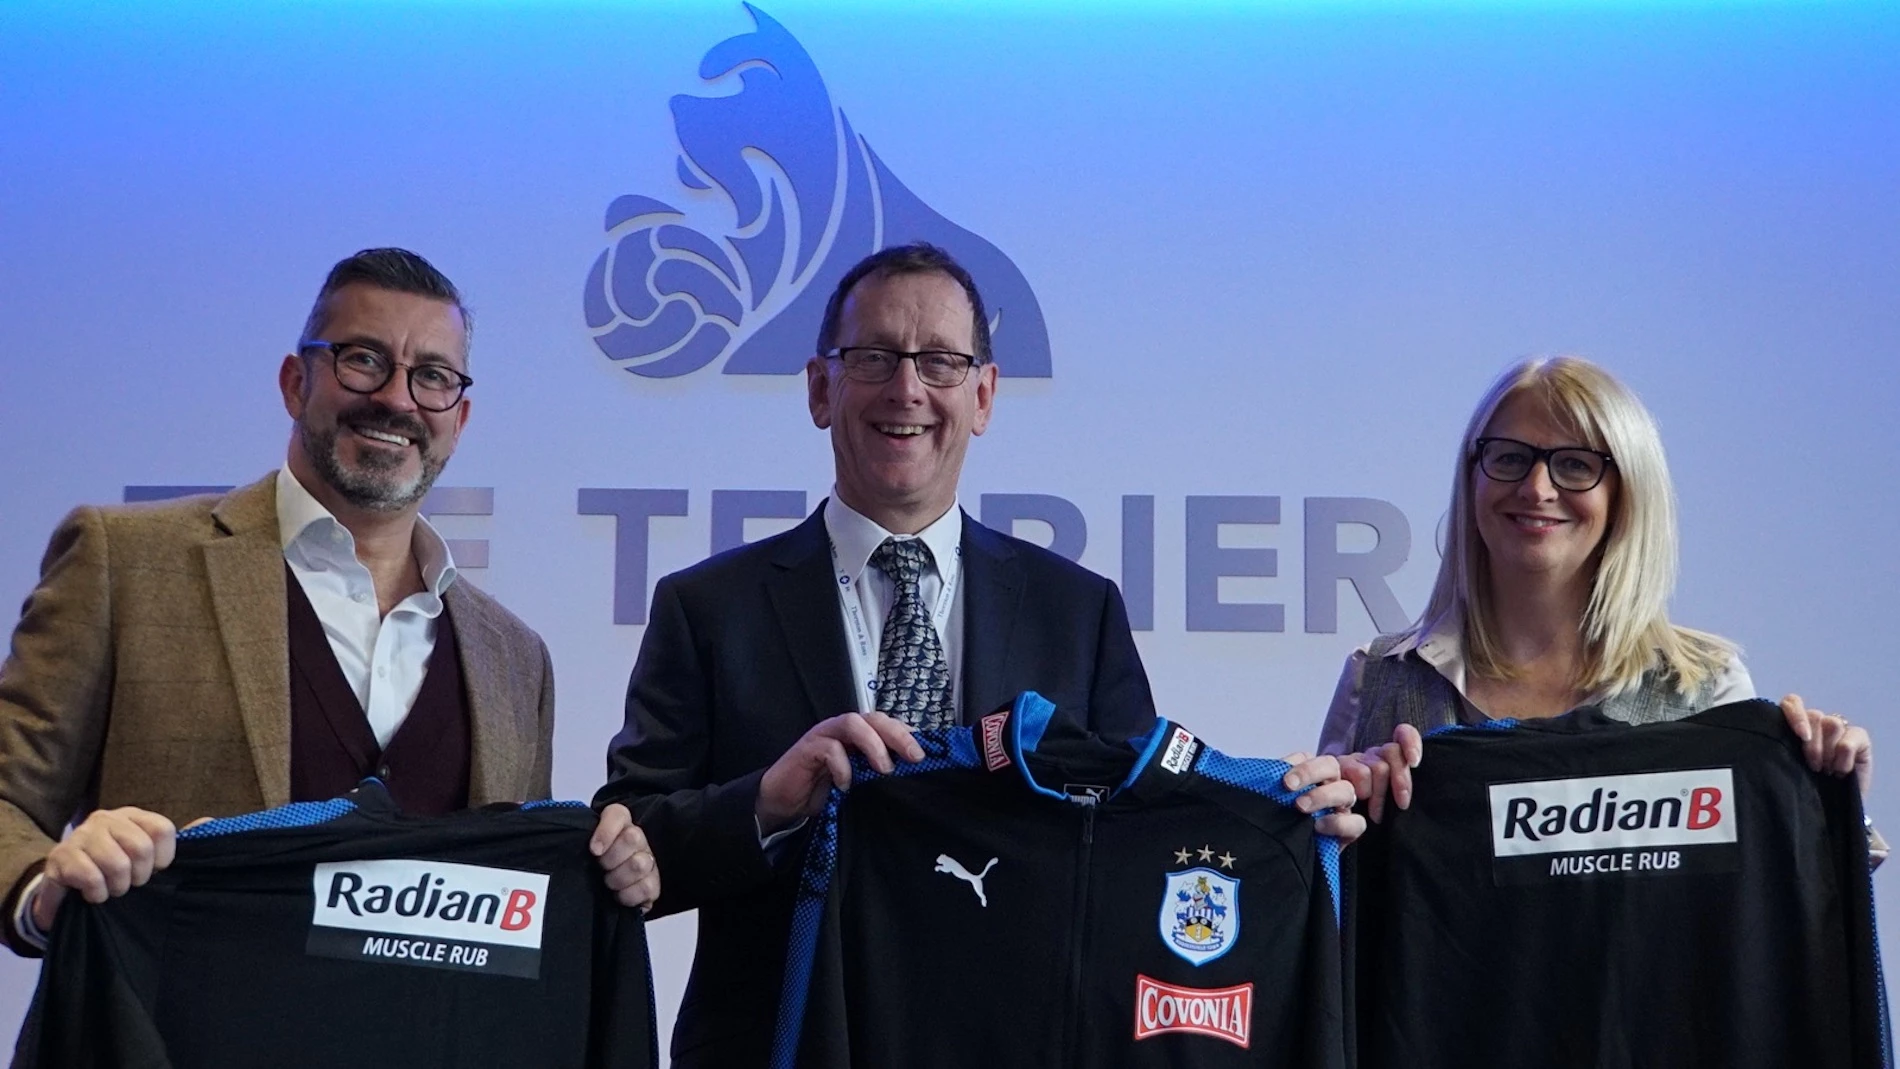  Huddersfield Town’s Commercial Director Sean Jarvis; Thornton + Ross’ Director of Consumer Marketing John Chamberlin; and Senior Commercial Manager Tracy Nelson.